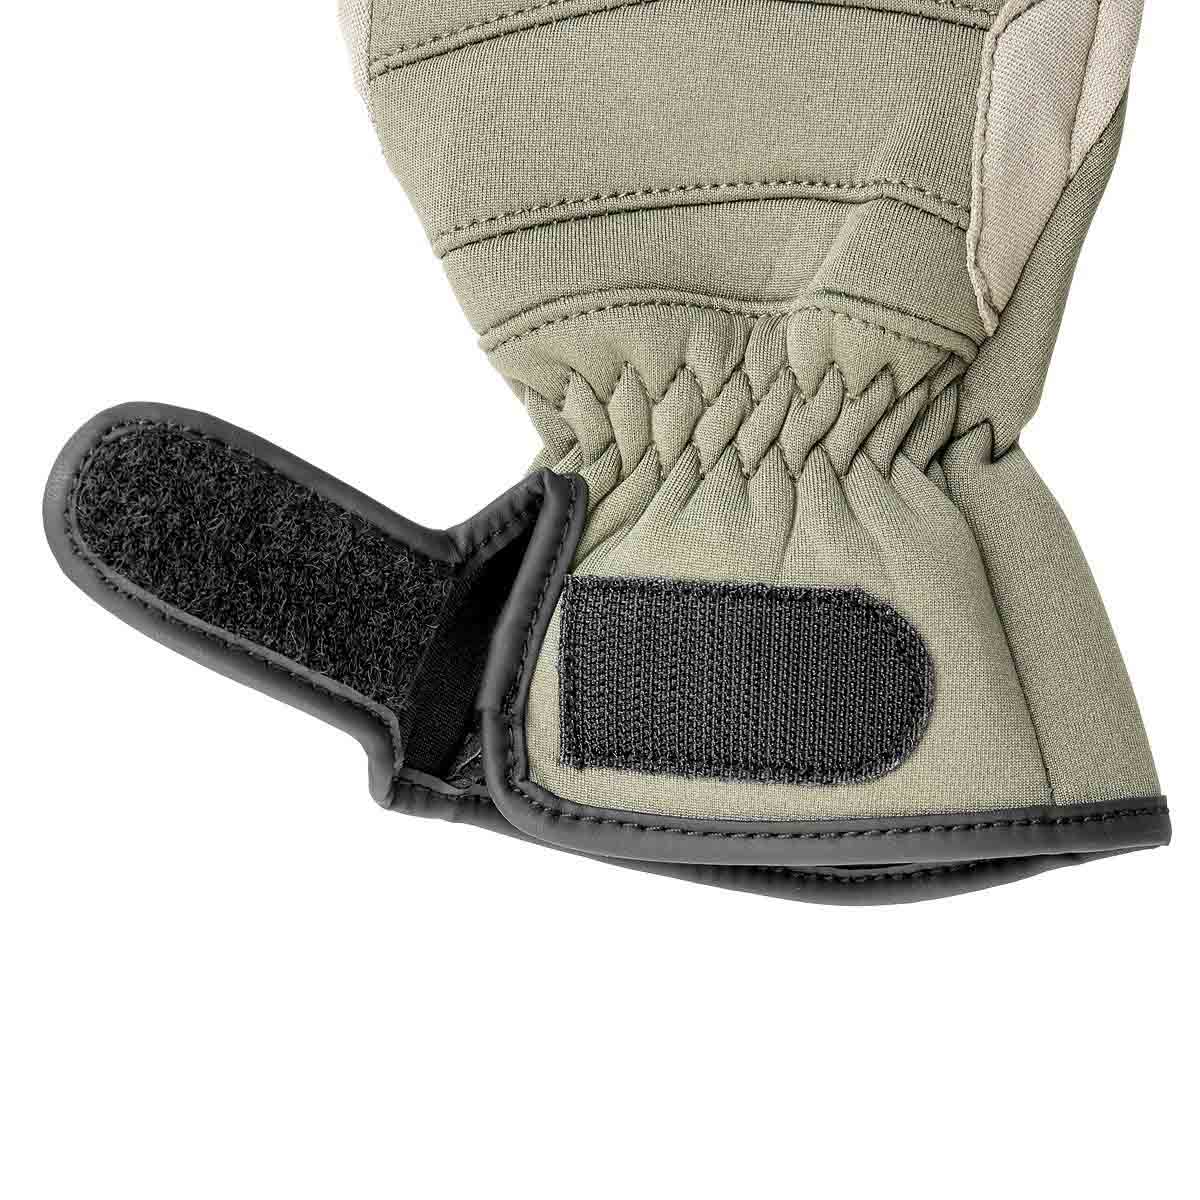 Neoprene Ice Fishing Waterproof Slit Finger Gloves are equipped with elastic bands on the wrists